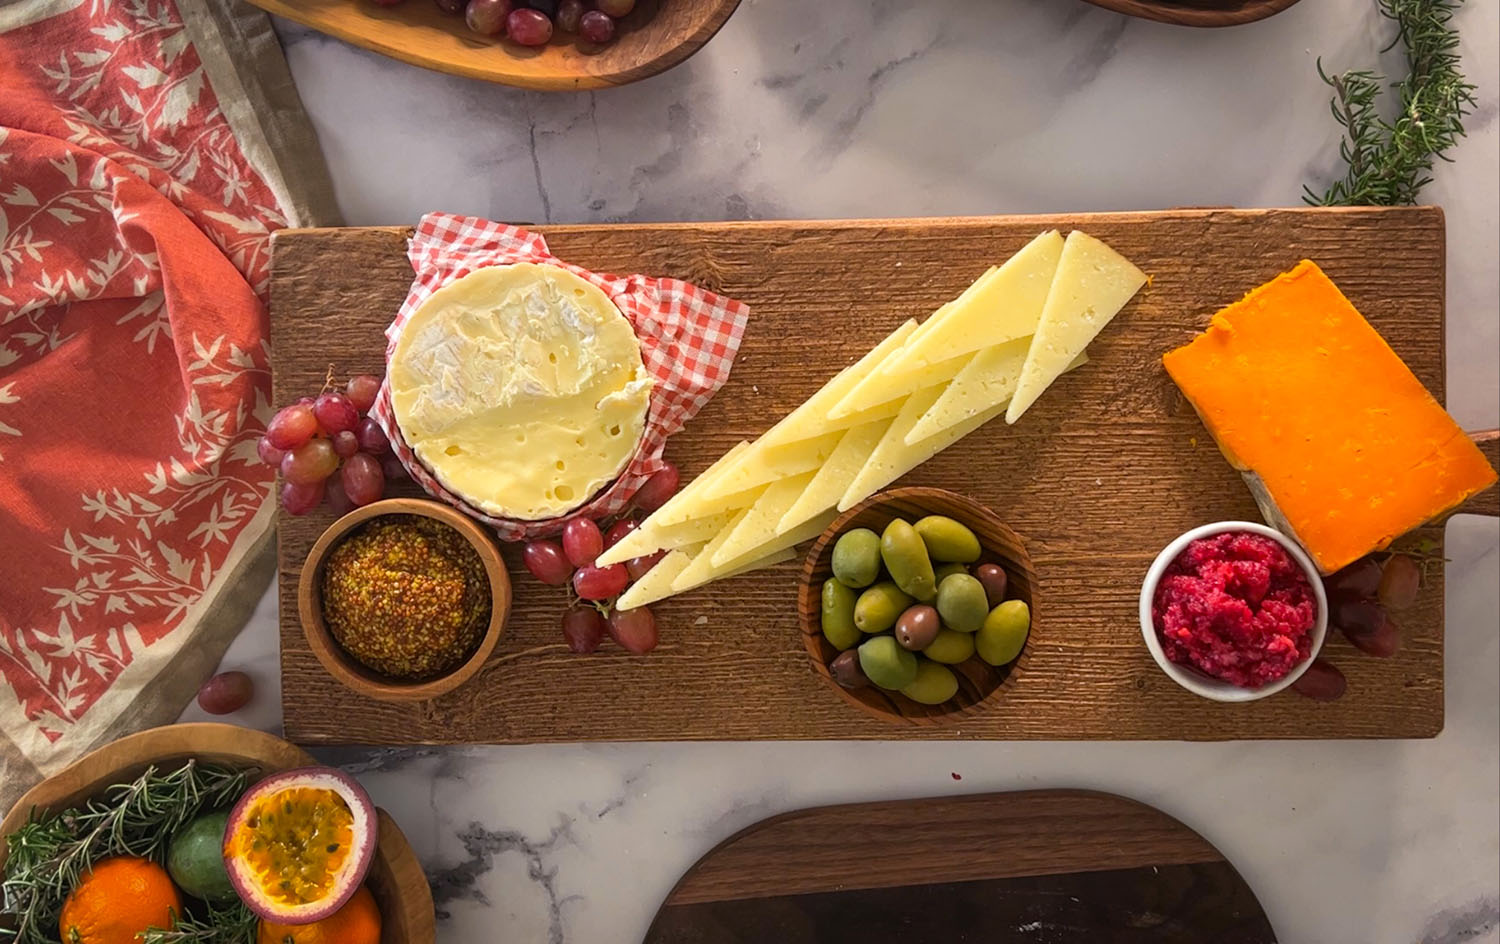 Charcuterie board with olives, dips, grapes, and cheeses